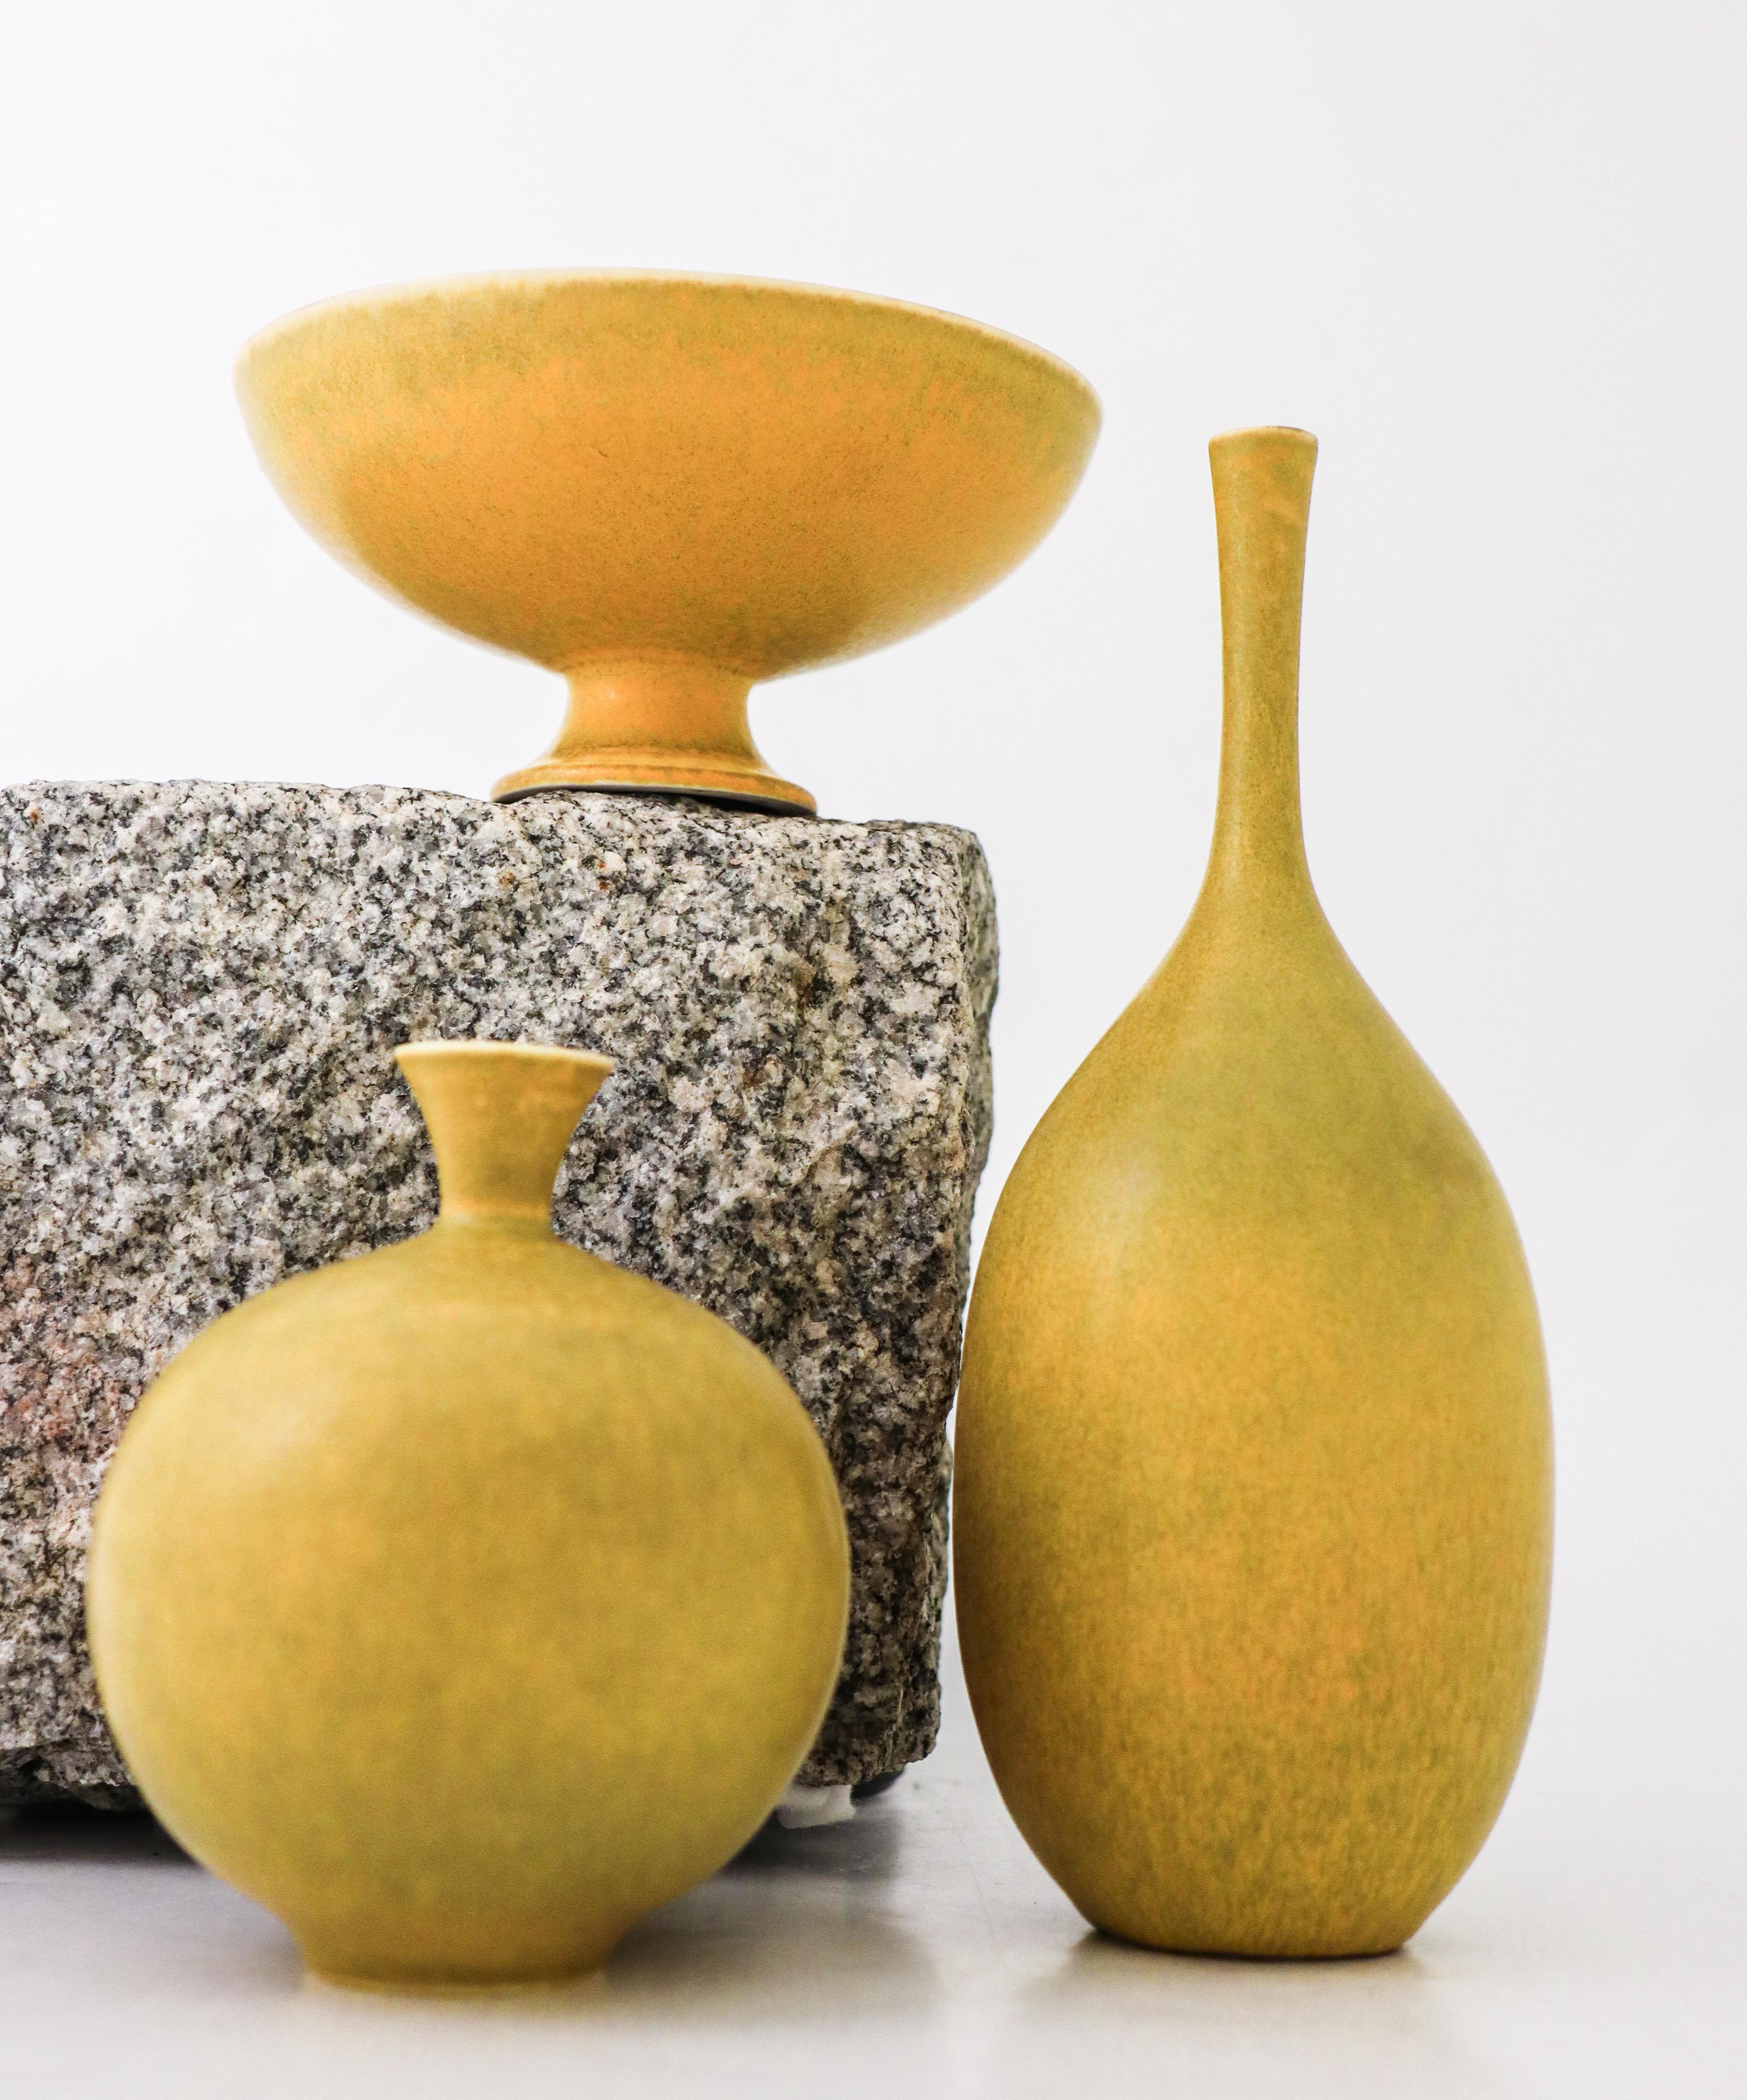 A lovely set of 2 yellow vases and one bowl with the same yellow color designed by Sven Wejsfelt in 1990 at Gustavsberg in Sweden. The bowl is 12,5 cm (5